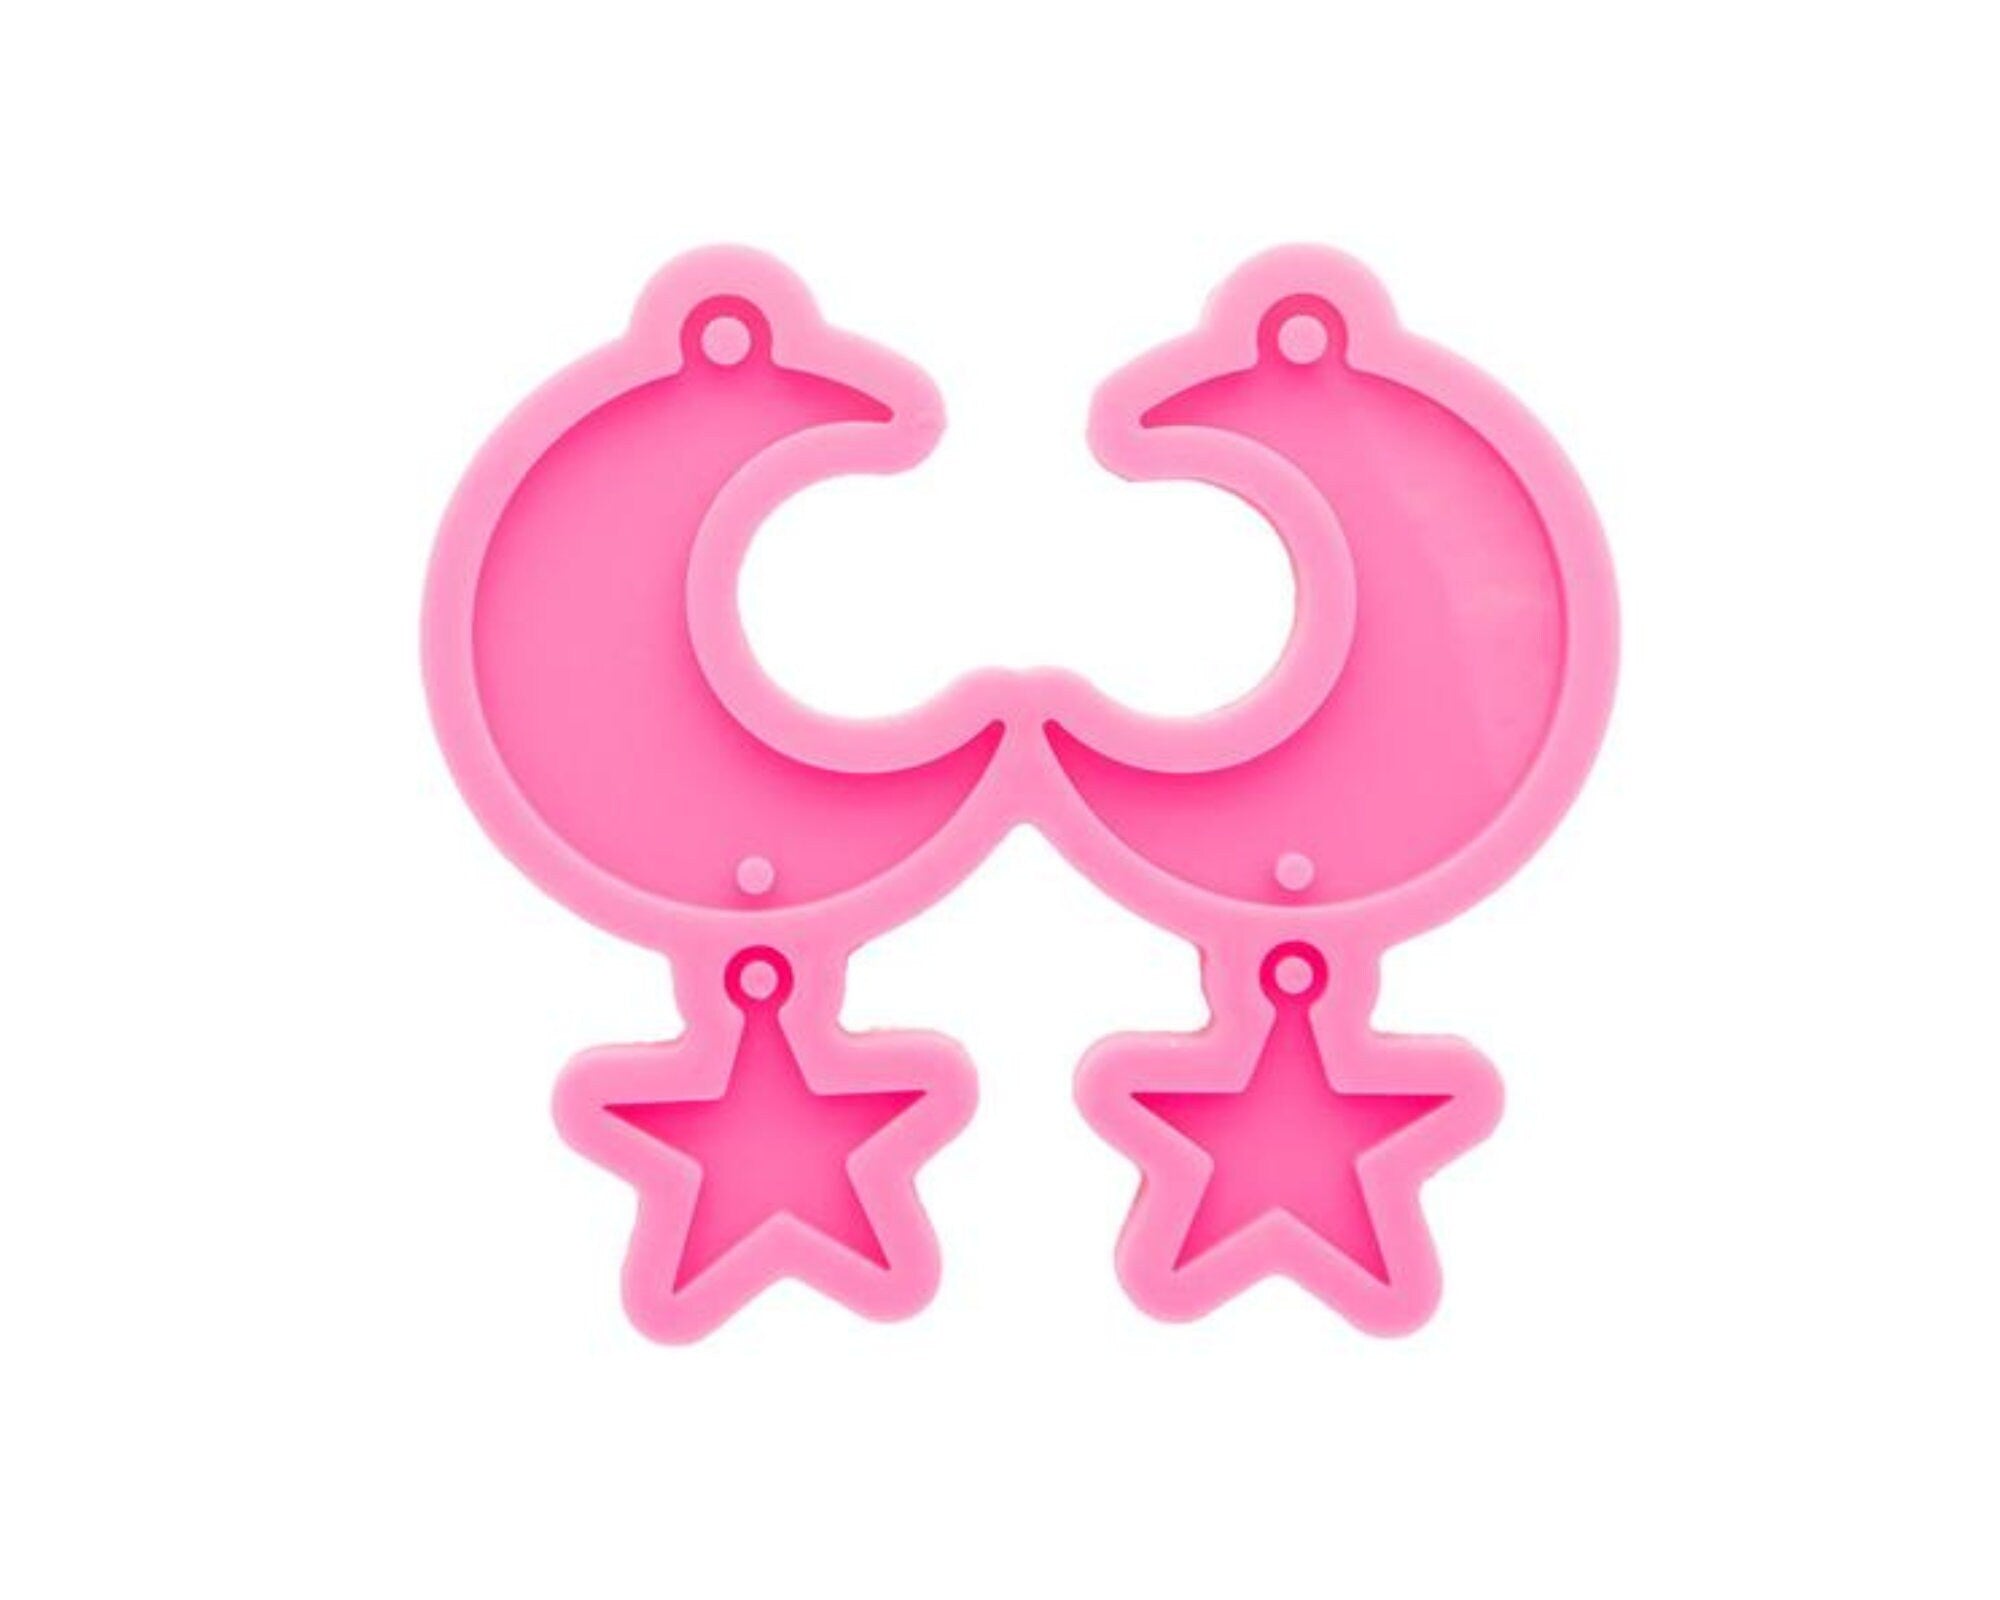 1pc Moon and Star earring mould, dangle drop mold, shiny Silicone mold, DIY Jewelry Making, epoxy Resin mould, Jewellery supplies australia